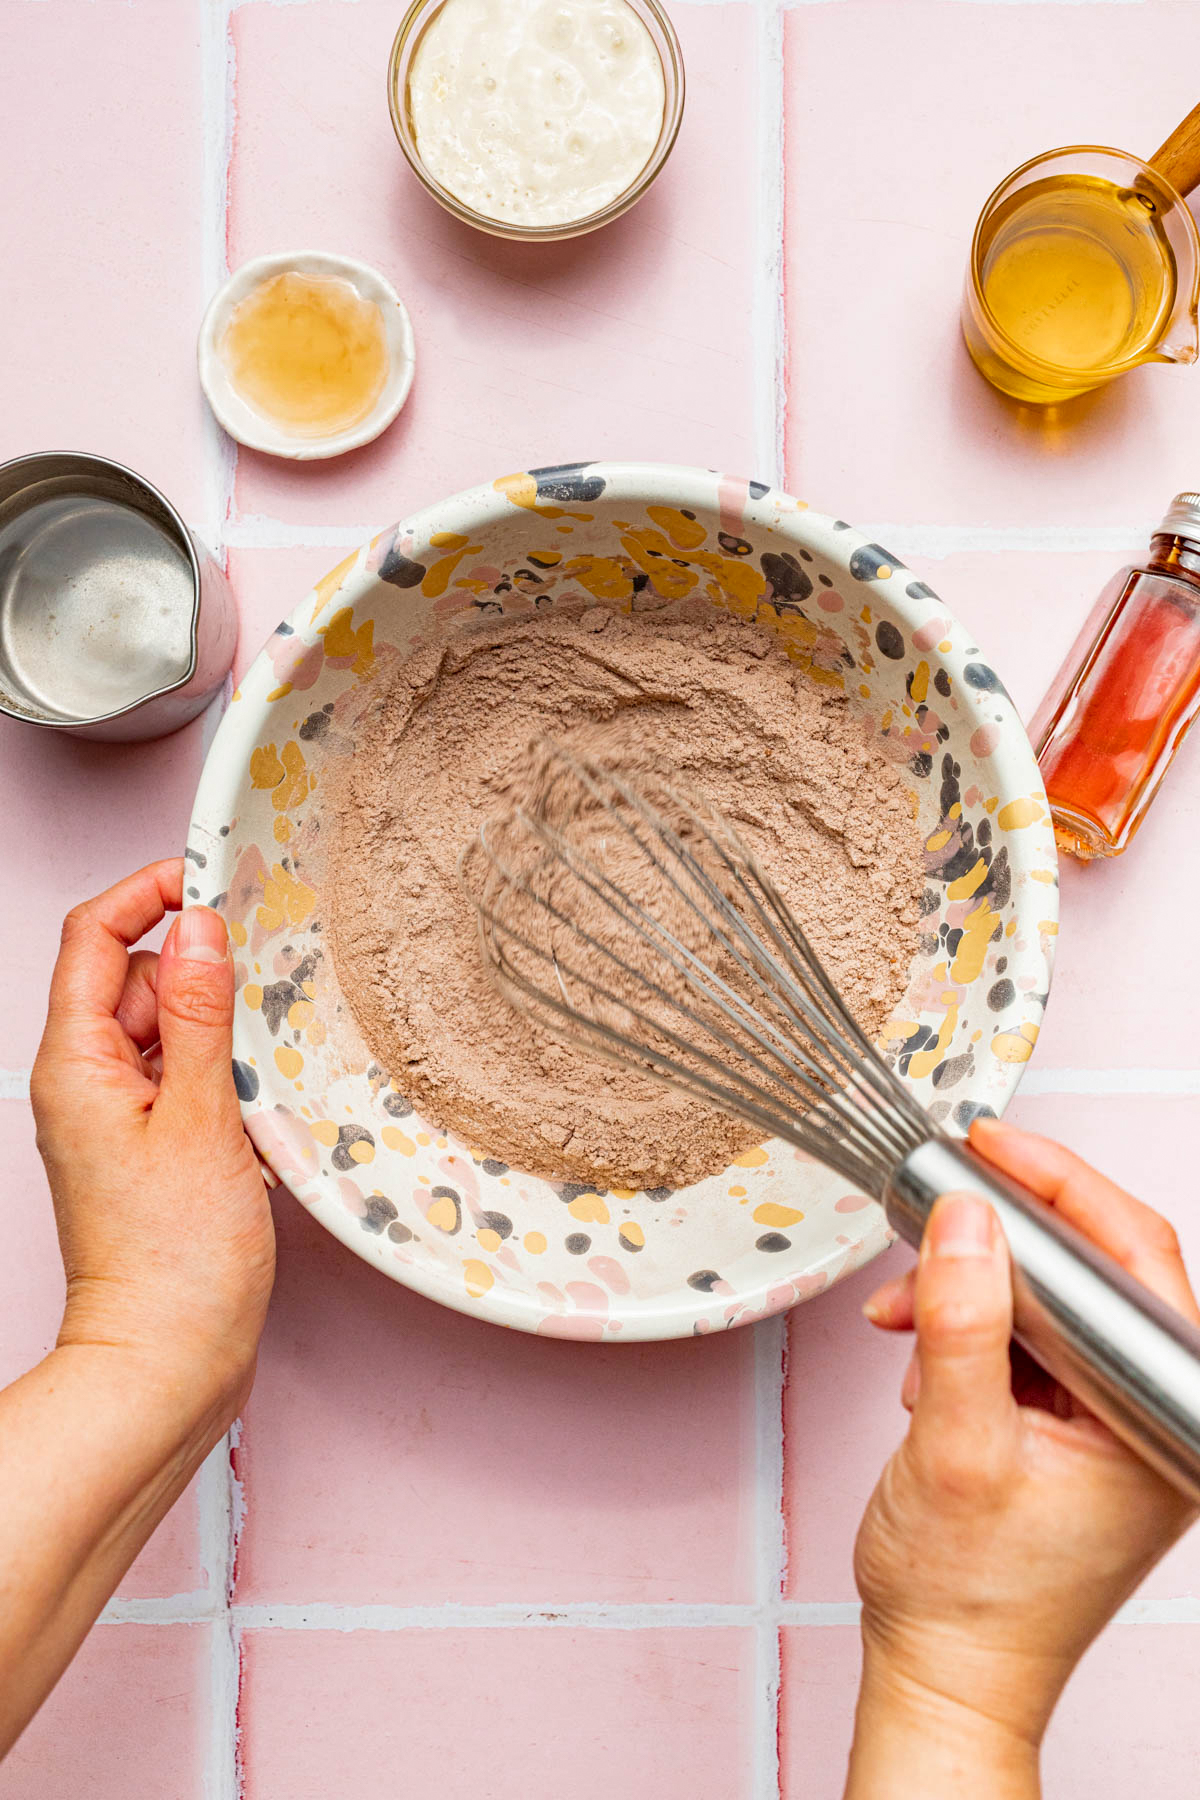 A hand using a whisk to mix dry ingredients in a mixing bowl.